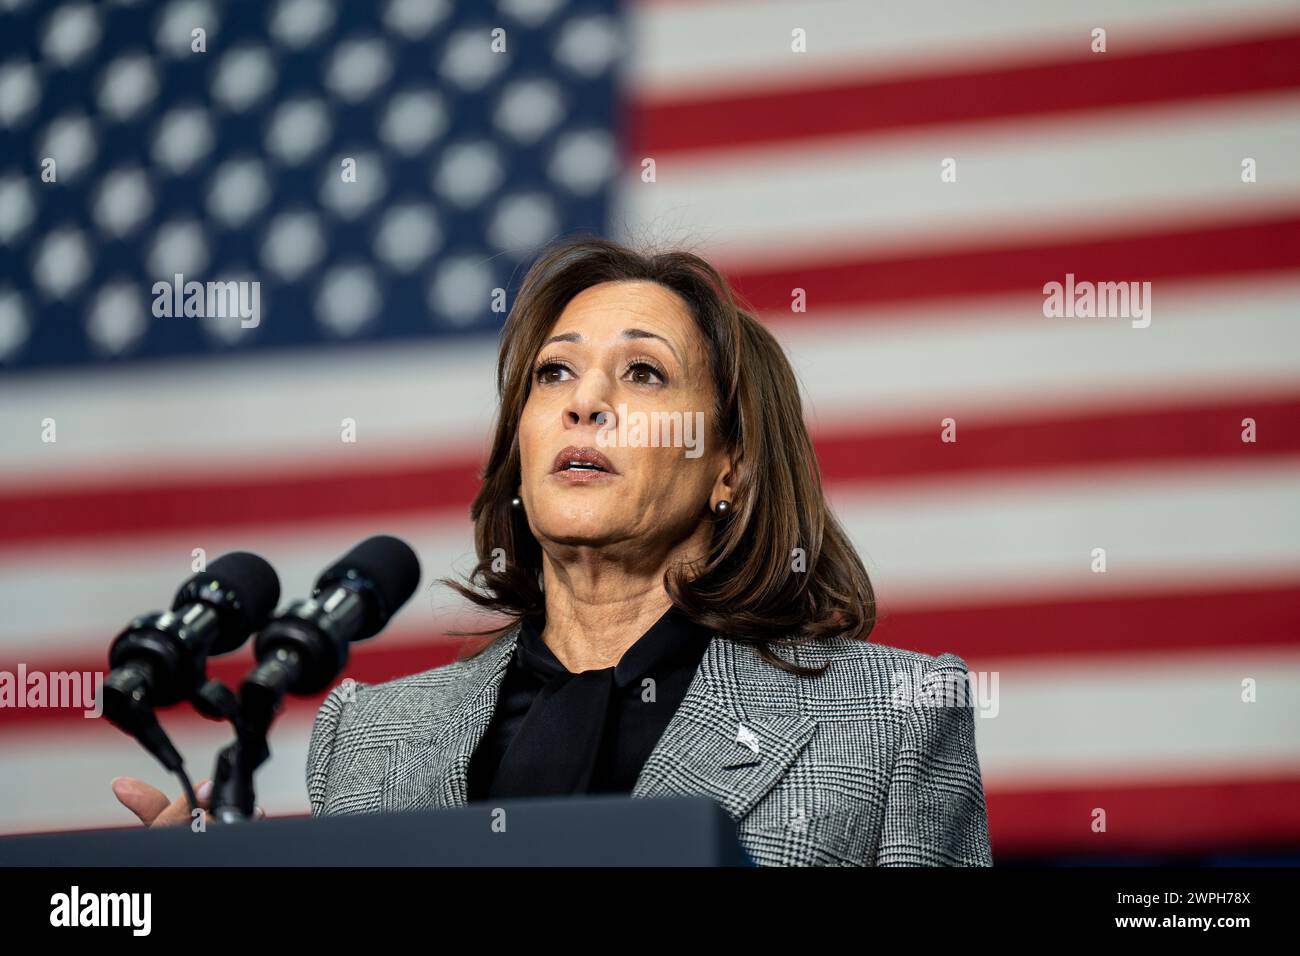 United States Vice President Kamala Harris gives a speech with the American Flag filling the frame in the background Stock Photo